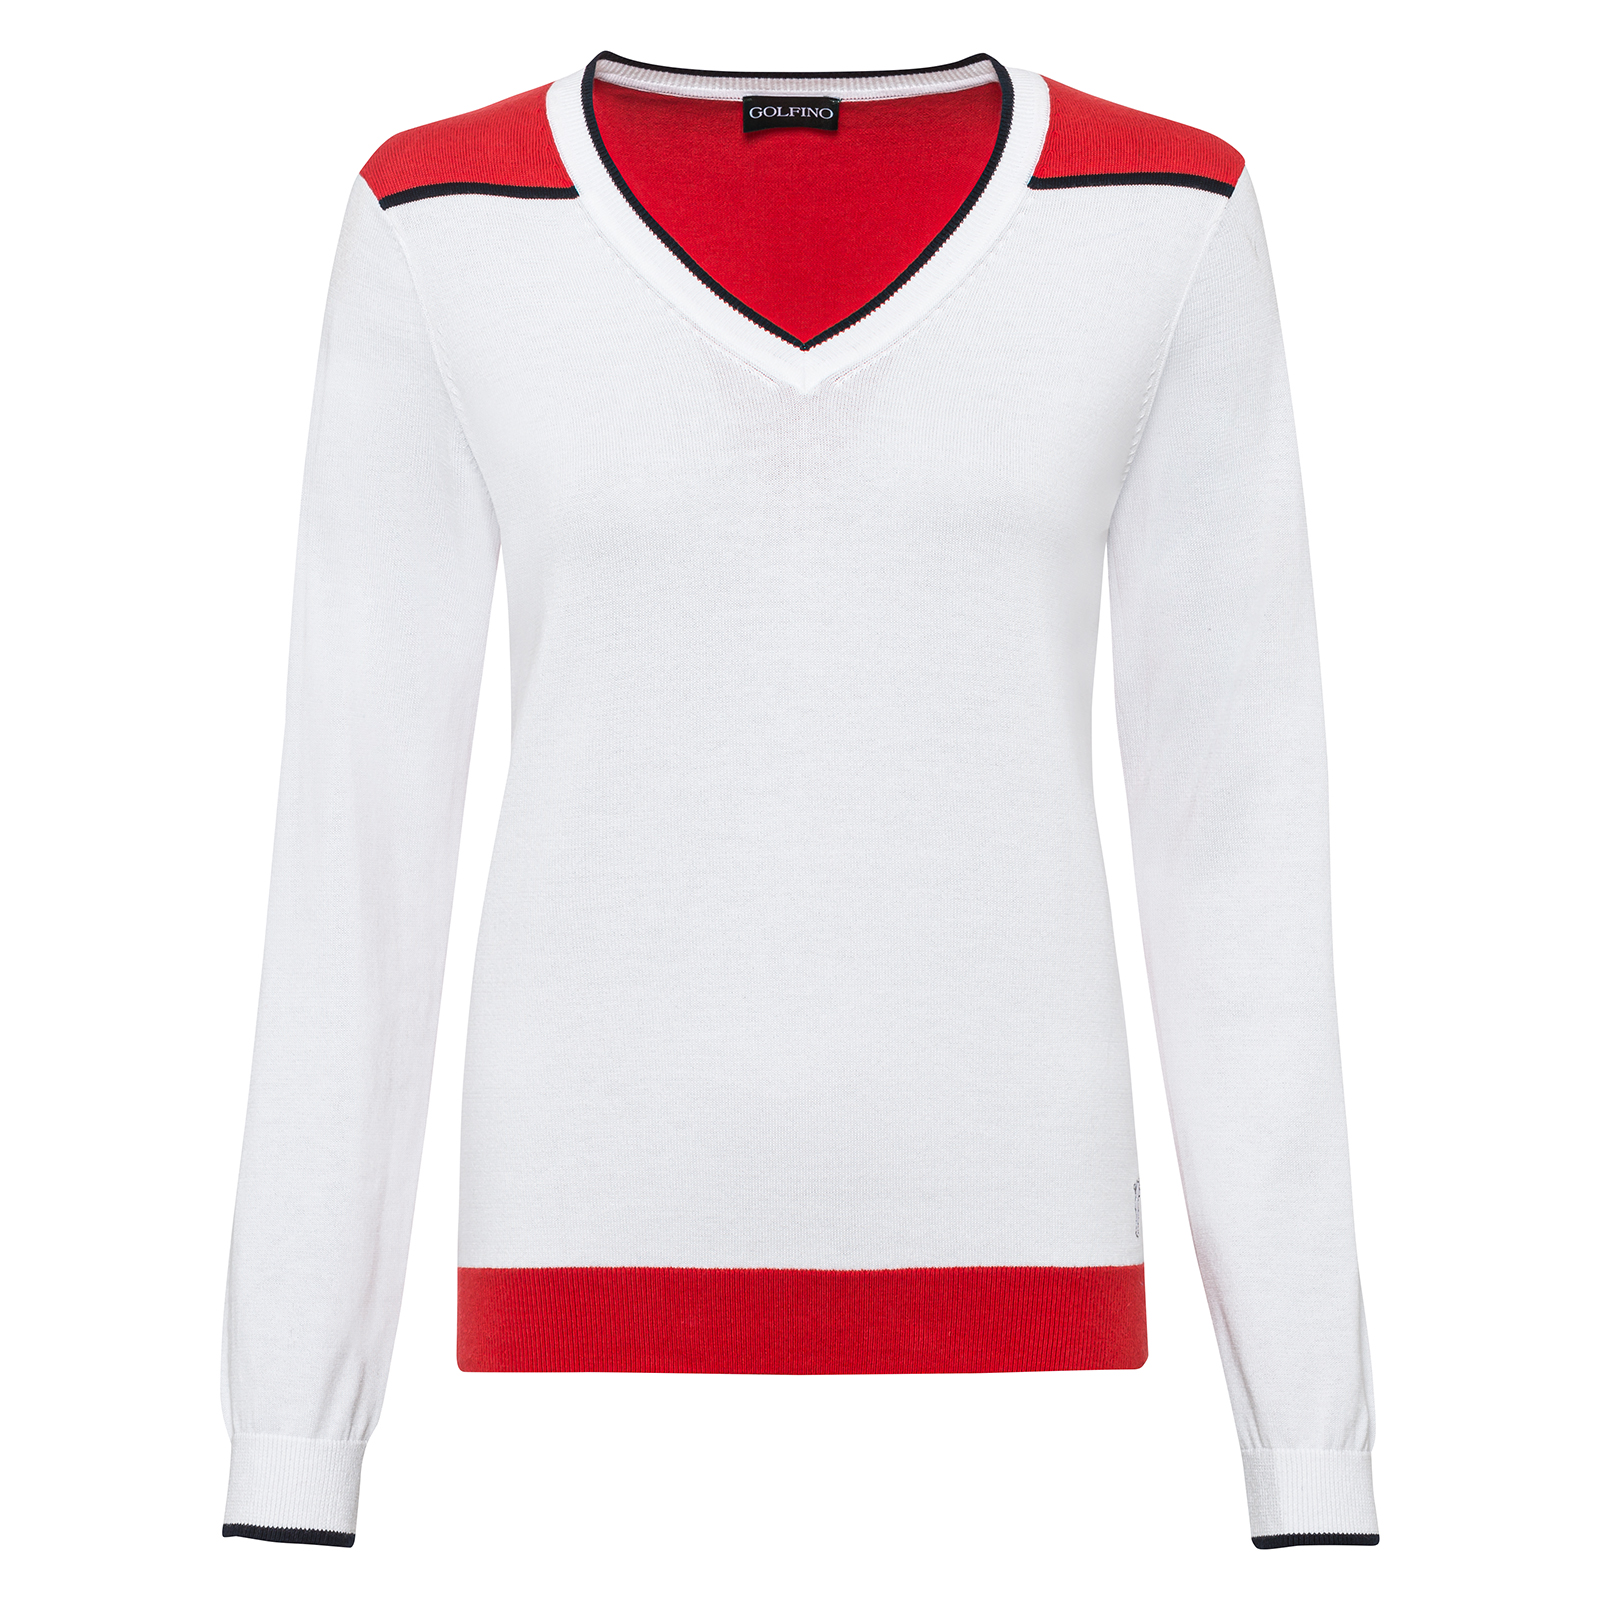 Ladies' soft golf sweater with colour blocking elements